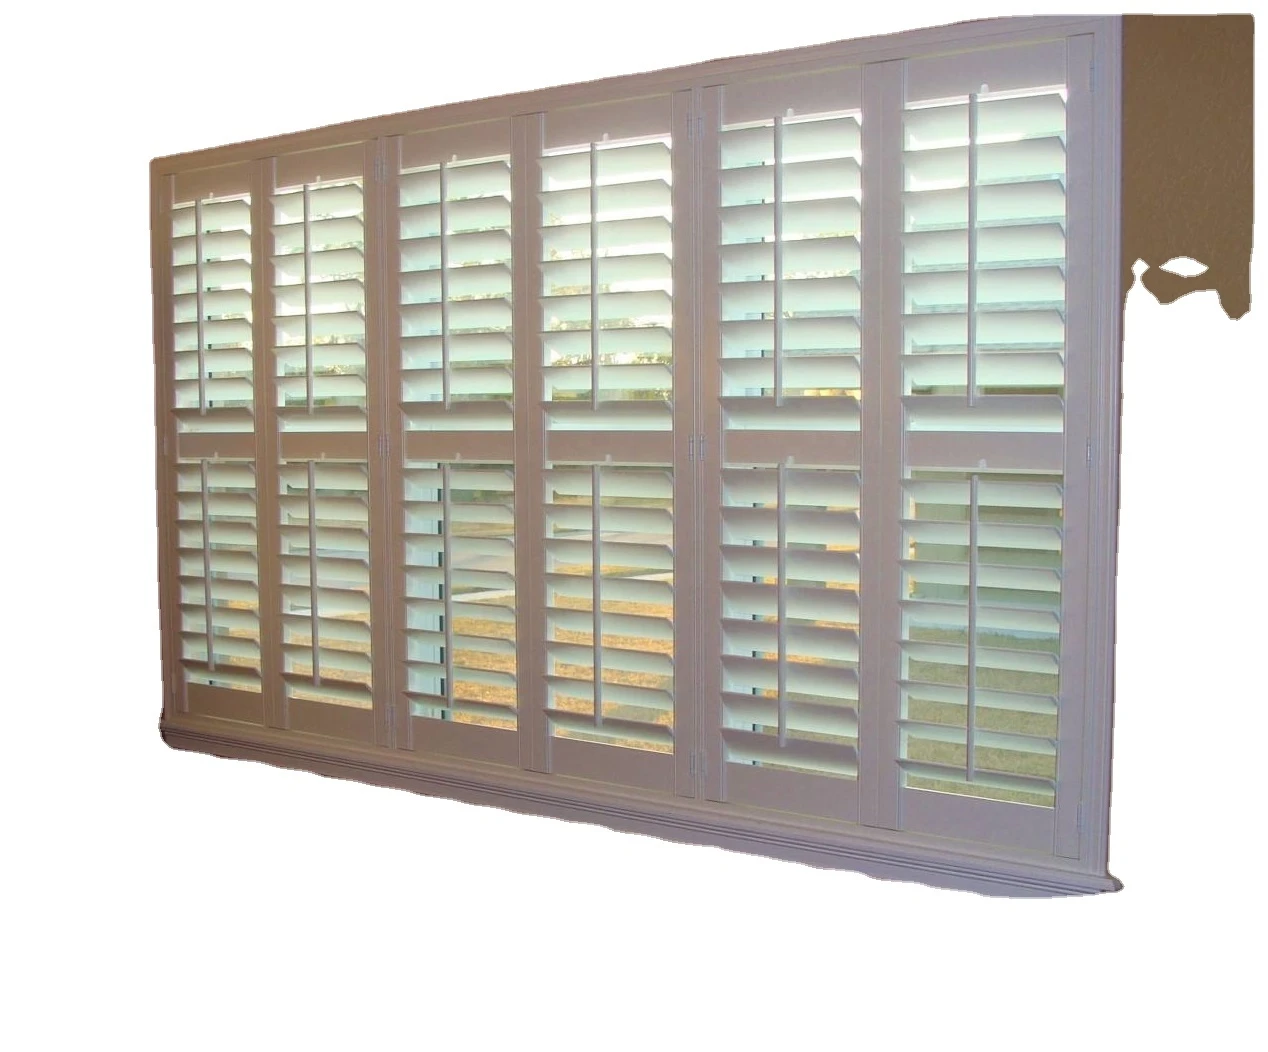 PVC timber wooden material shutters indoor design fauxwood shutters